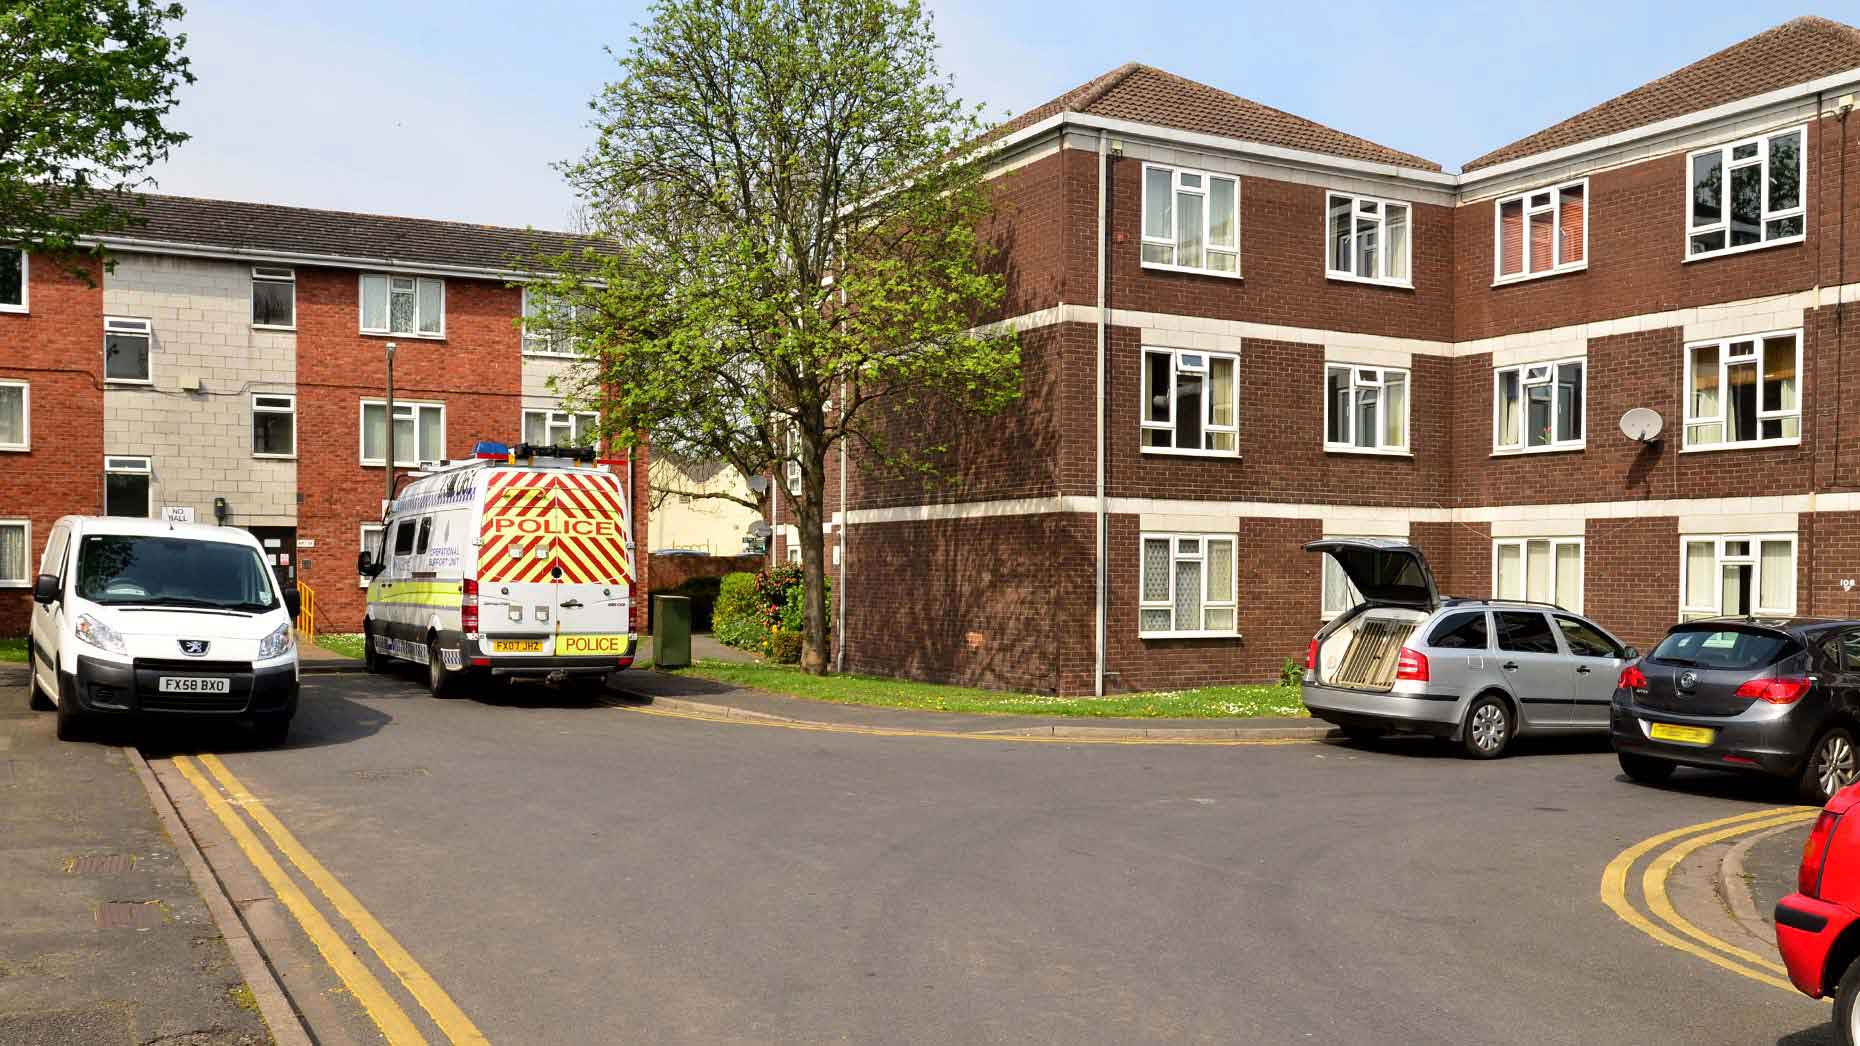 Police are investigating at the house where the body was found on Hermit Street in Lincoln. Photo: Steve Smailes for The Lincolnite